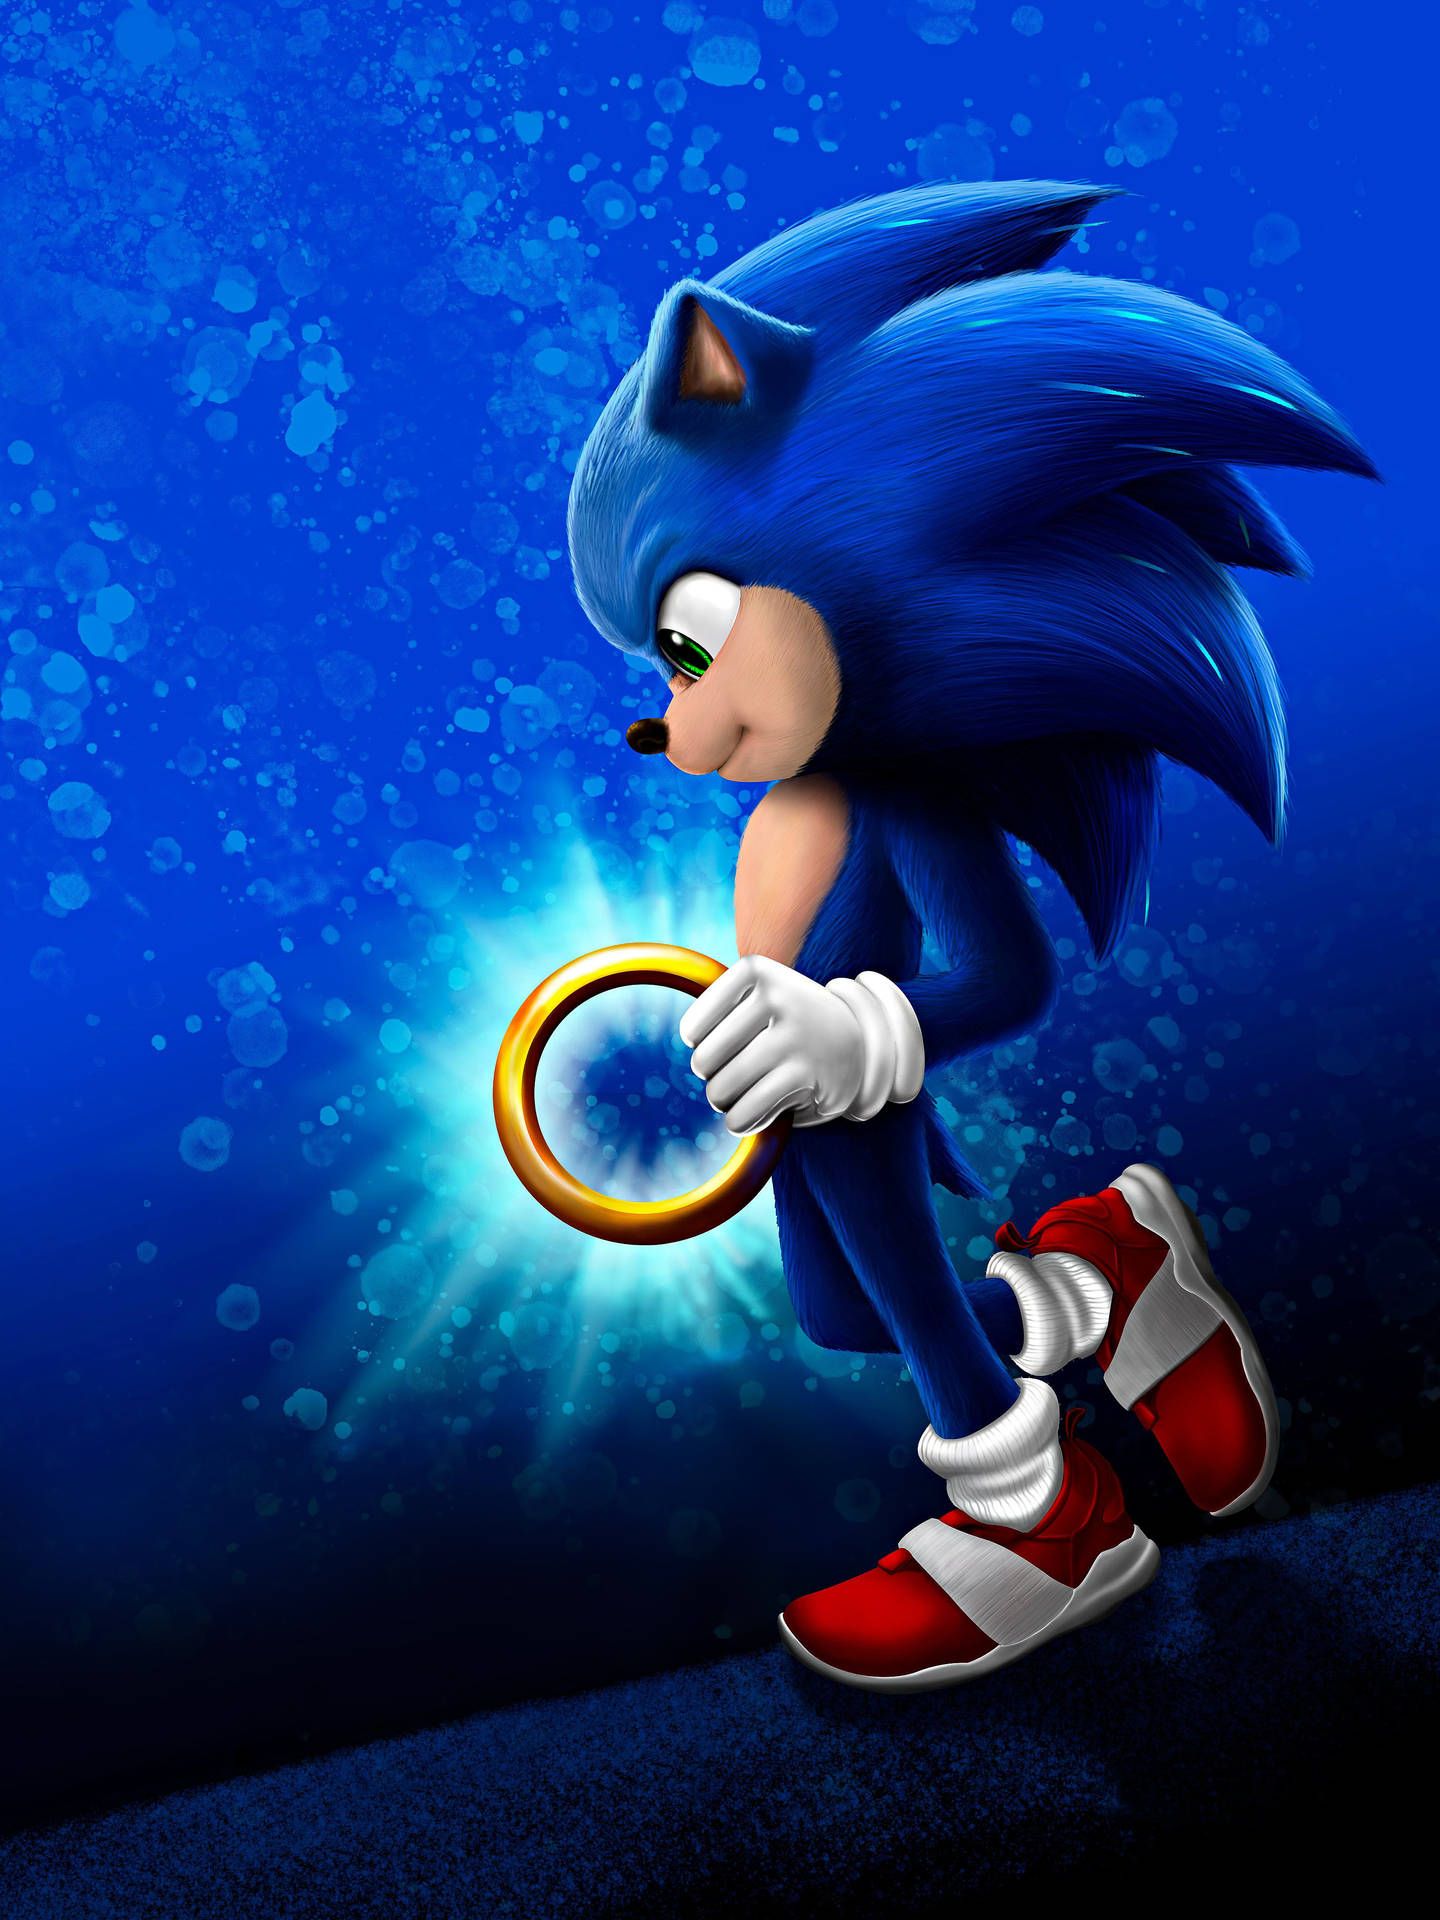 Download Sonic The Hedgehog With A Glowing Ring Wallpaper